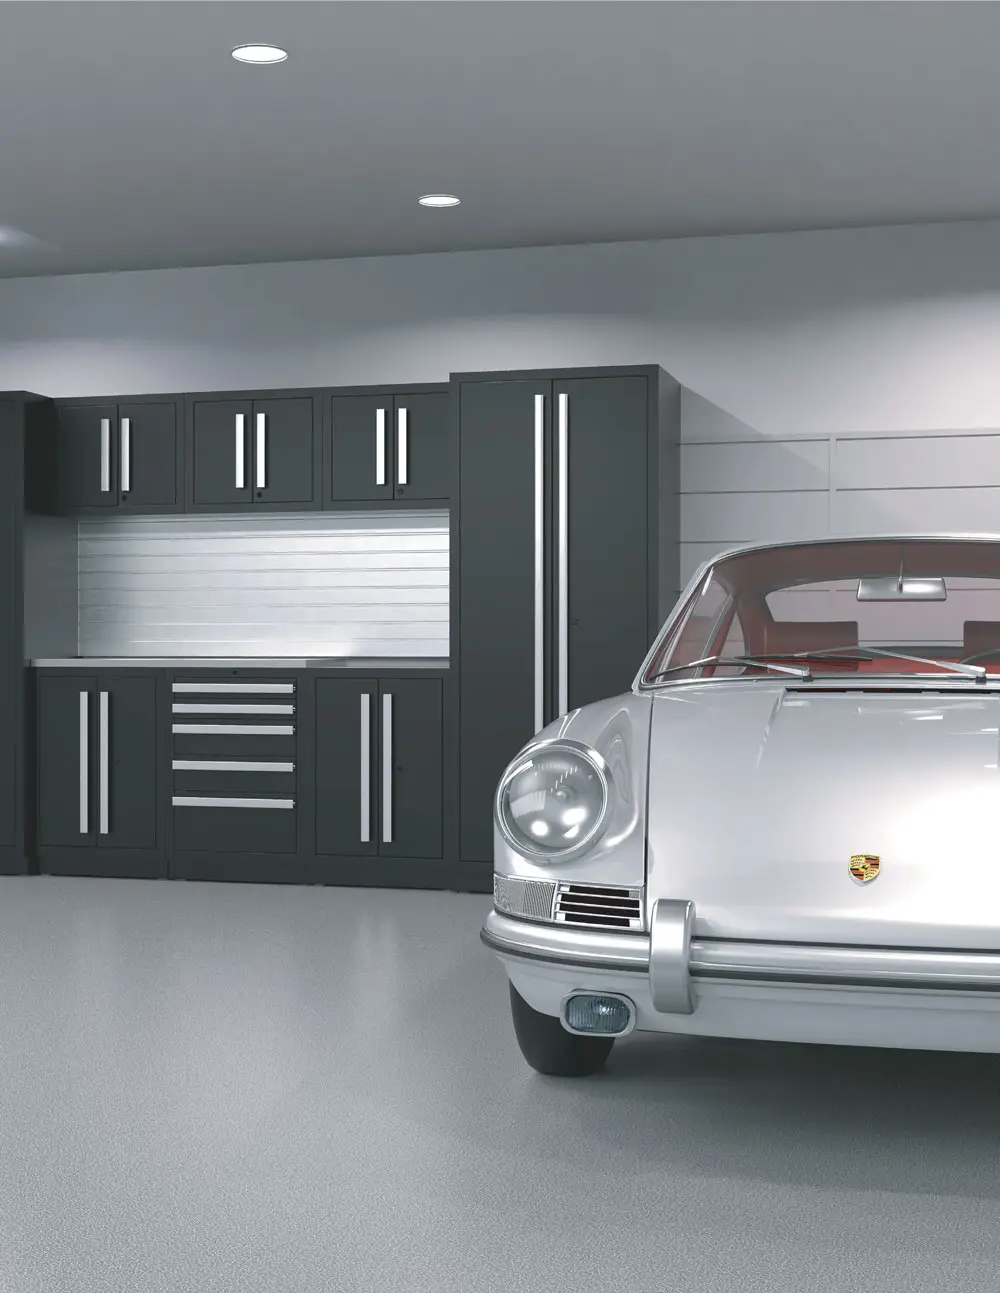 A sleek, classic silver sports car is parked in a modern, tidy garage featuring black cabinets with silver handles, drawers, and a metallic backsplash. The environment is well-lit with recessed ceiling lights, highlighting the organized cabinets and polished space.